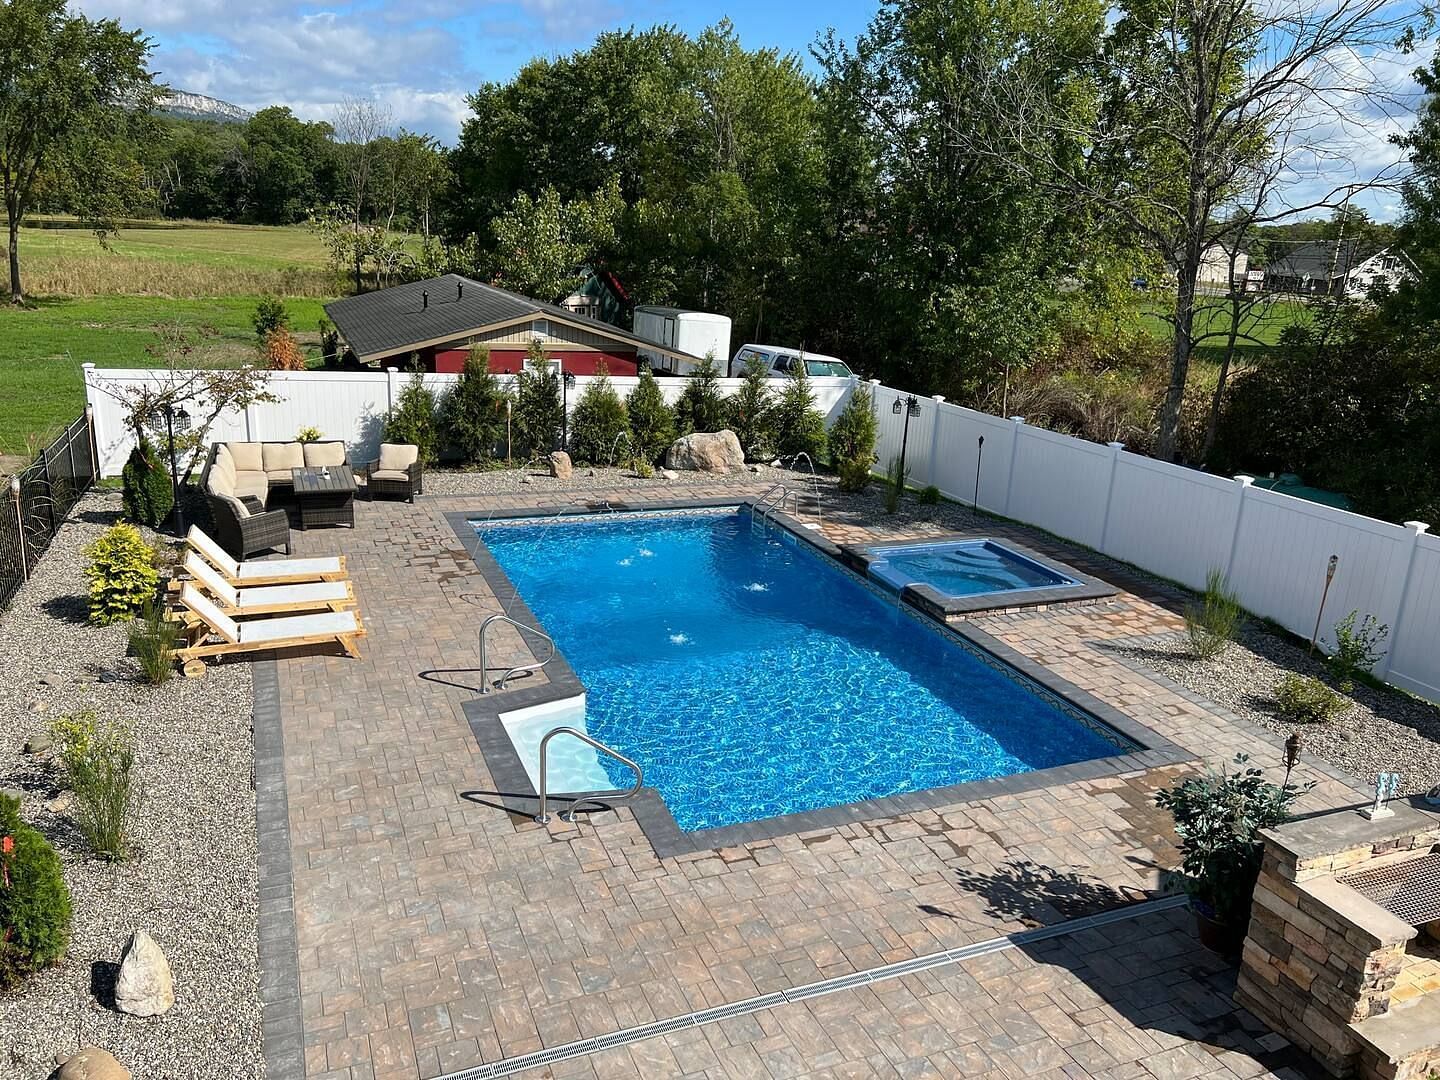 JWguest Villa at Wallkill, New York | Resort style house with pool - 5min from bethel | Jwbnb no brobnb 46